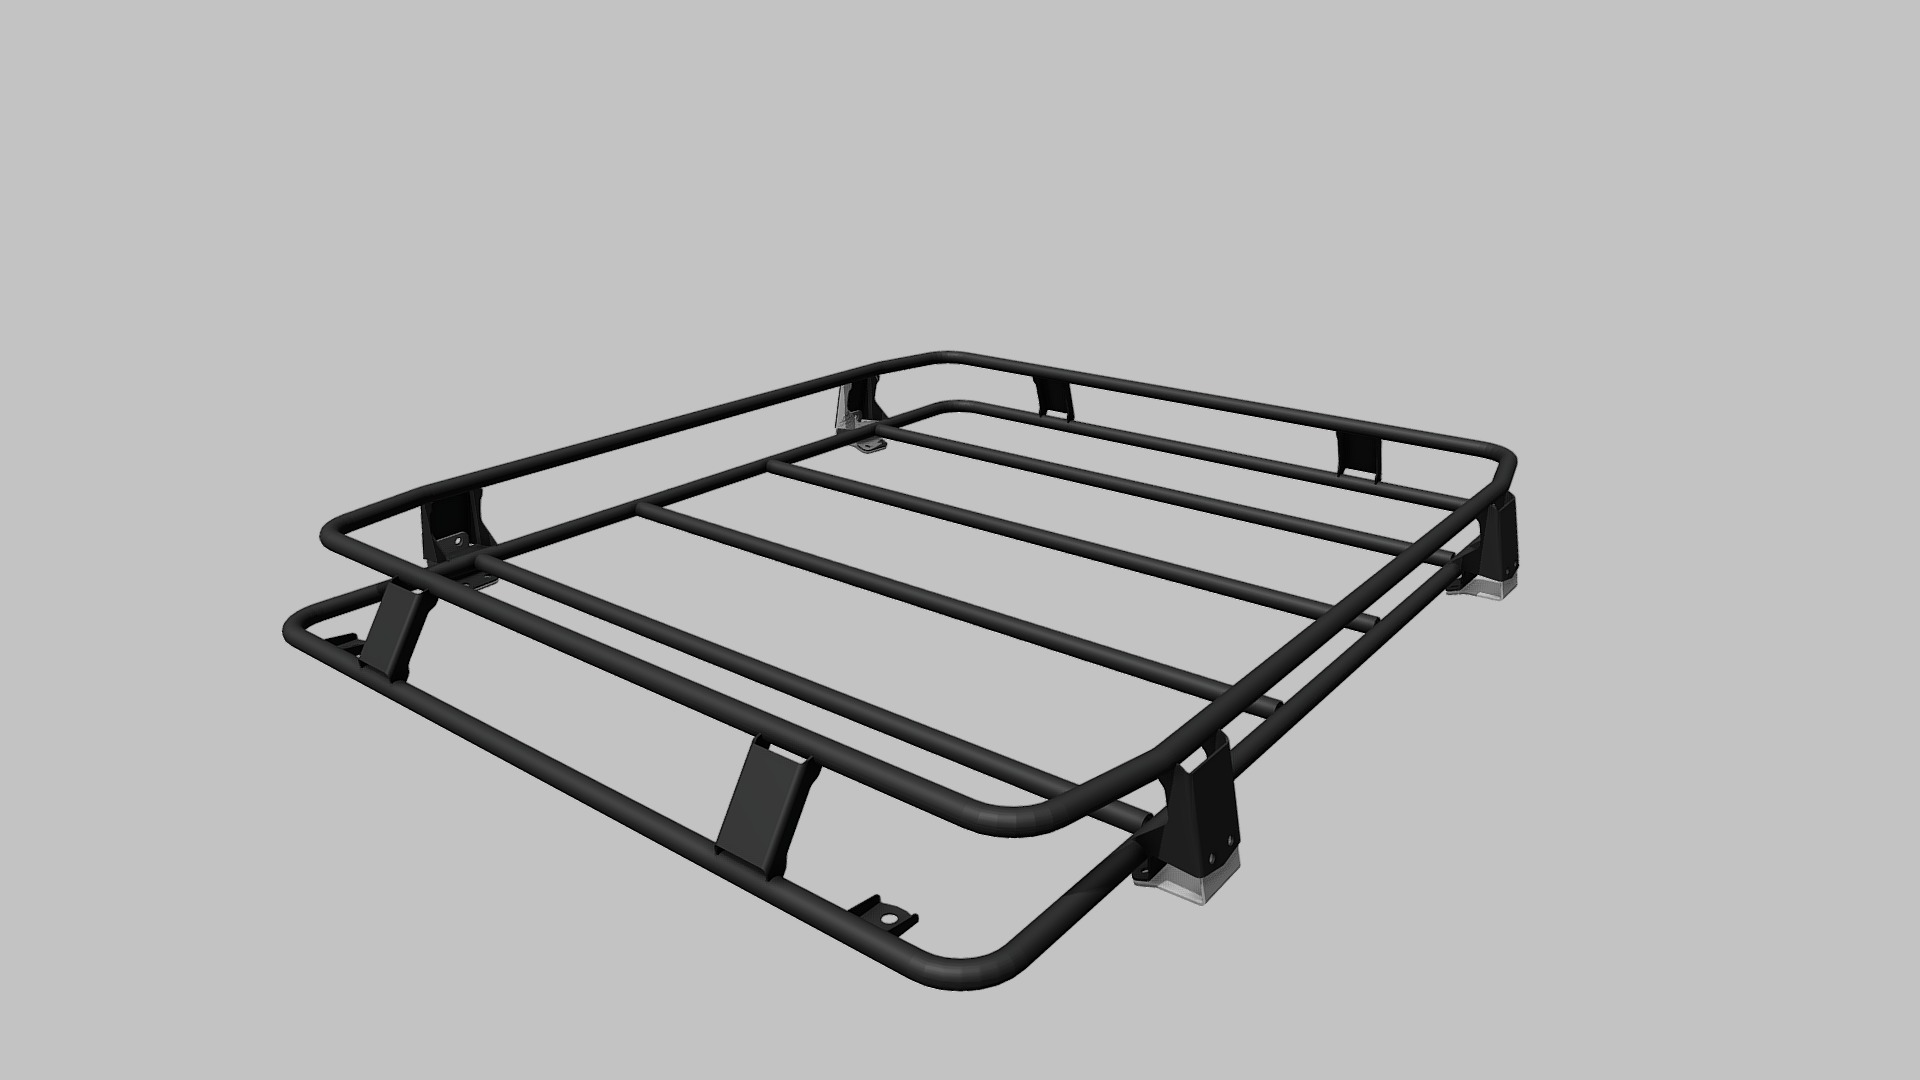 3D model Roof rack Lada4x4 Rys - This is a 3D model of the Roof rack Lada4x4 Rys. The 3D model is about a black metal frame.